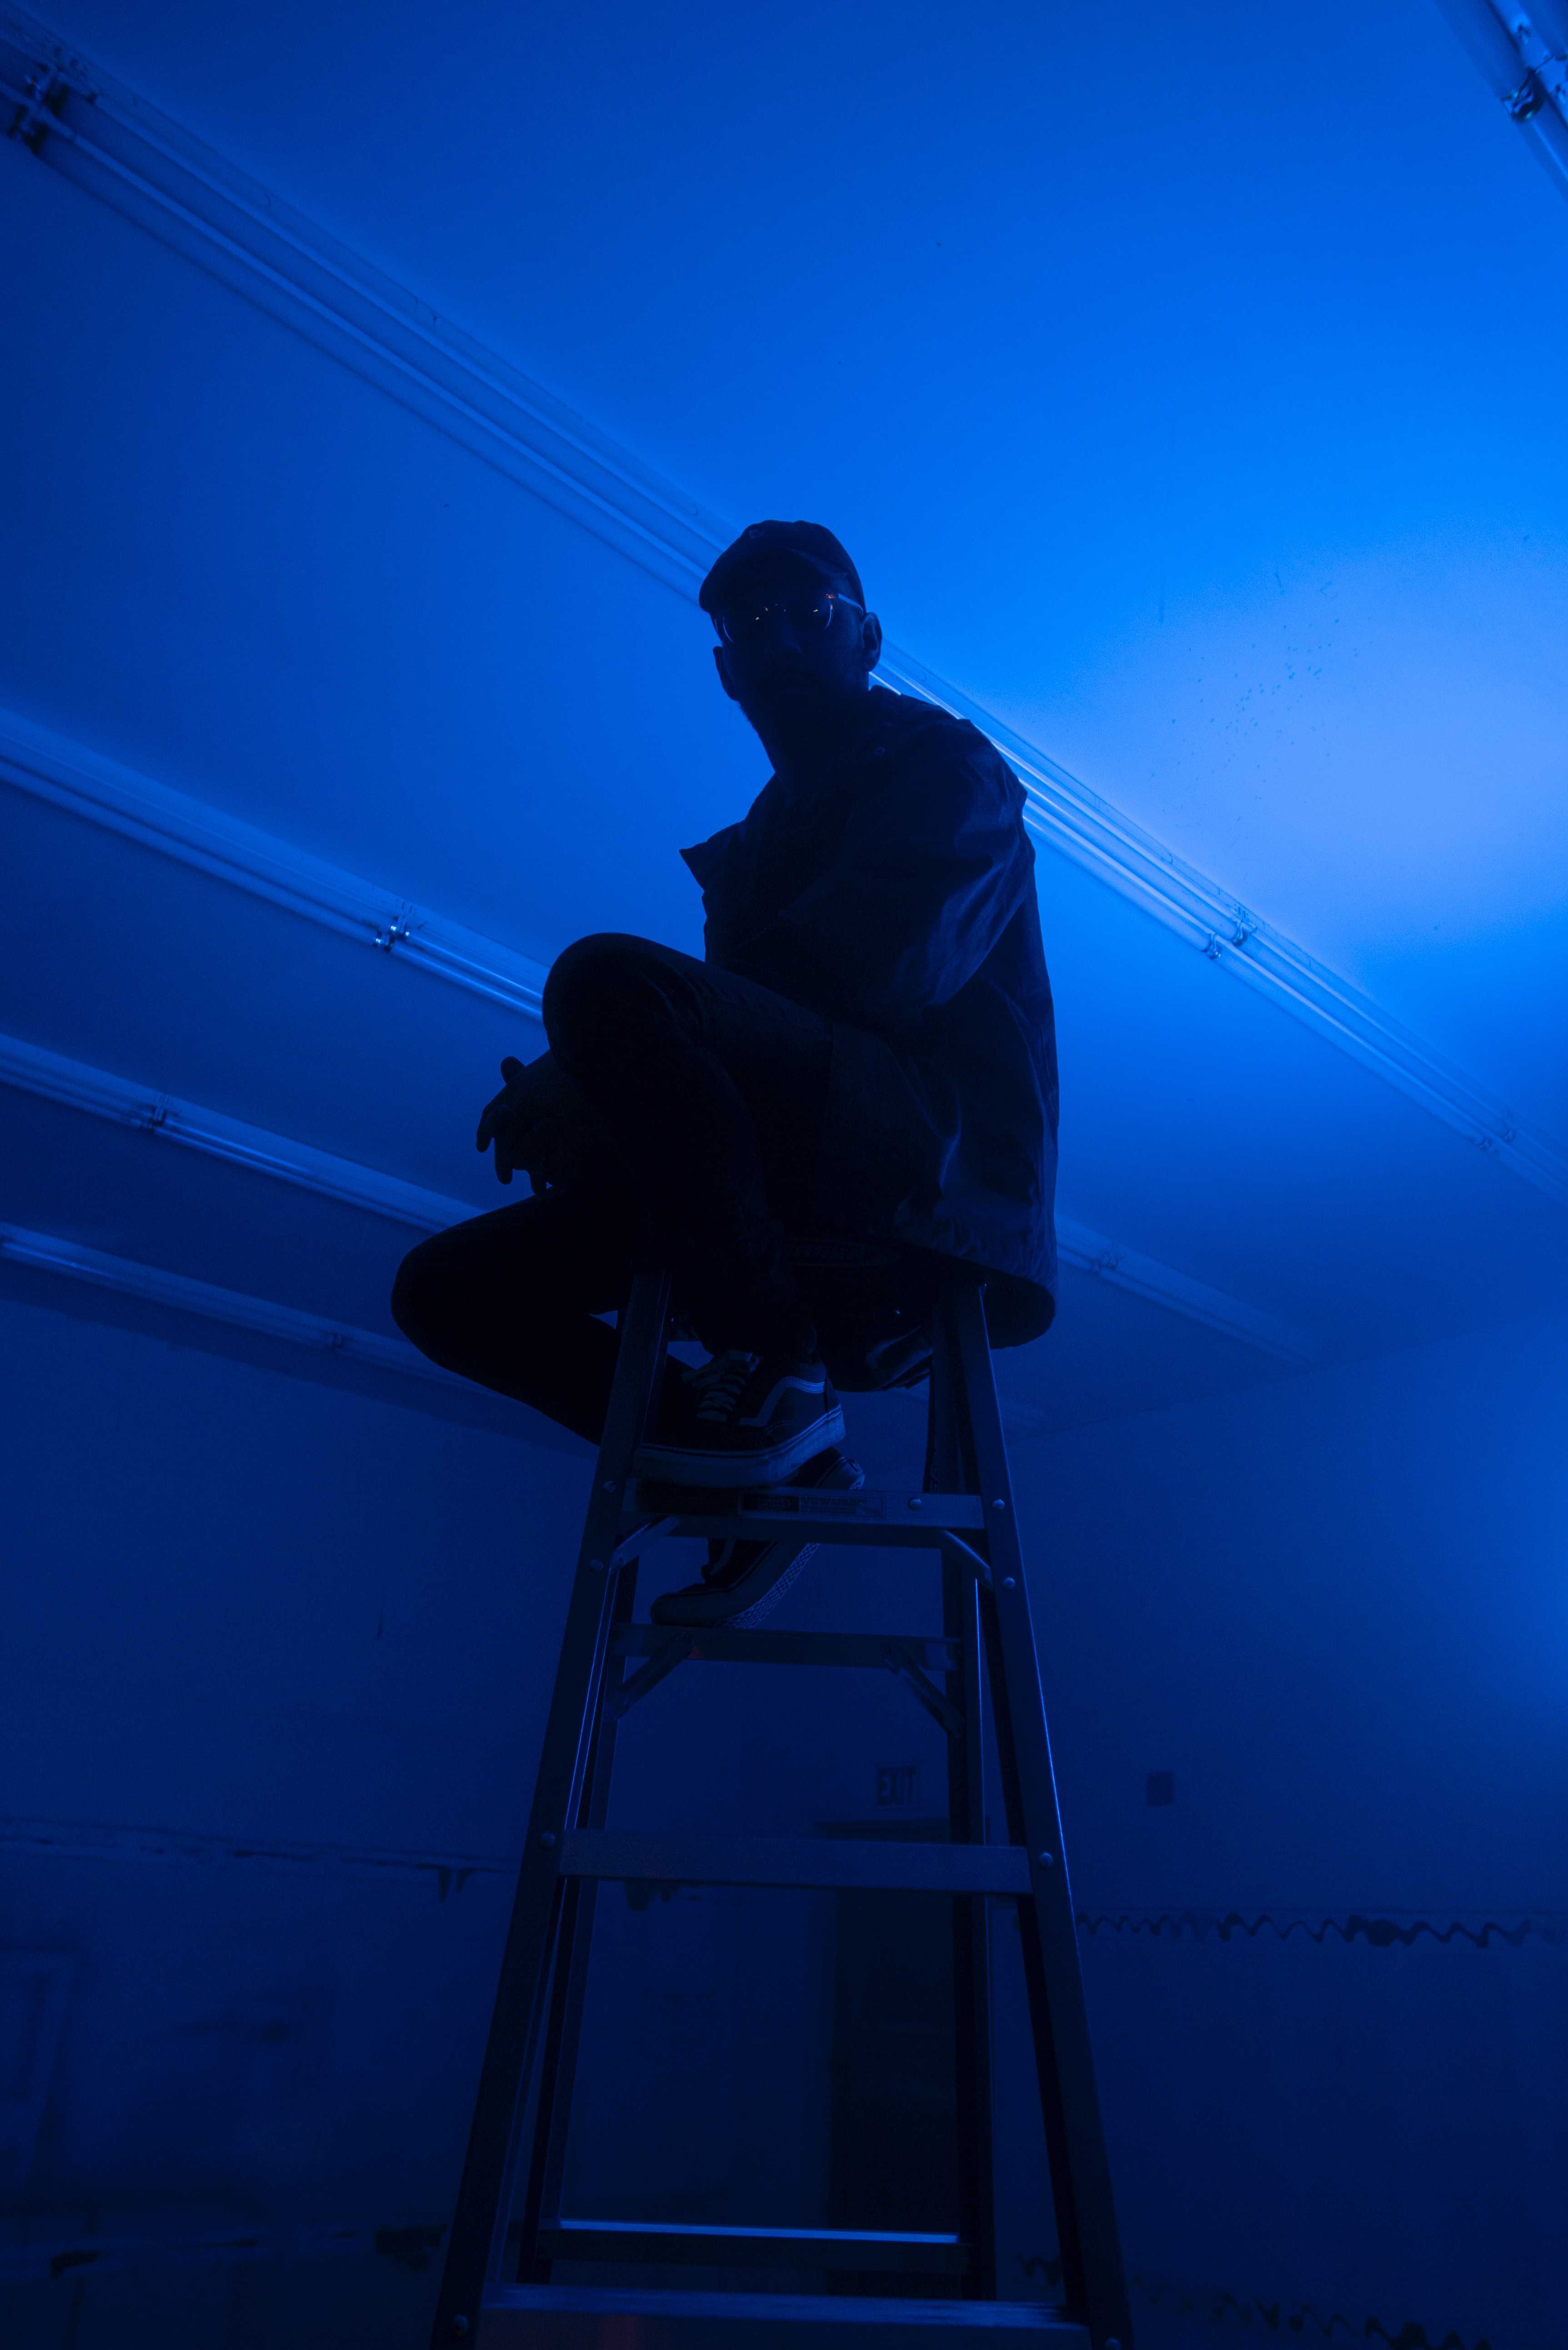 New Lock Screen Wallpapers blue, dark, neon, stairs, ladder, human, person